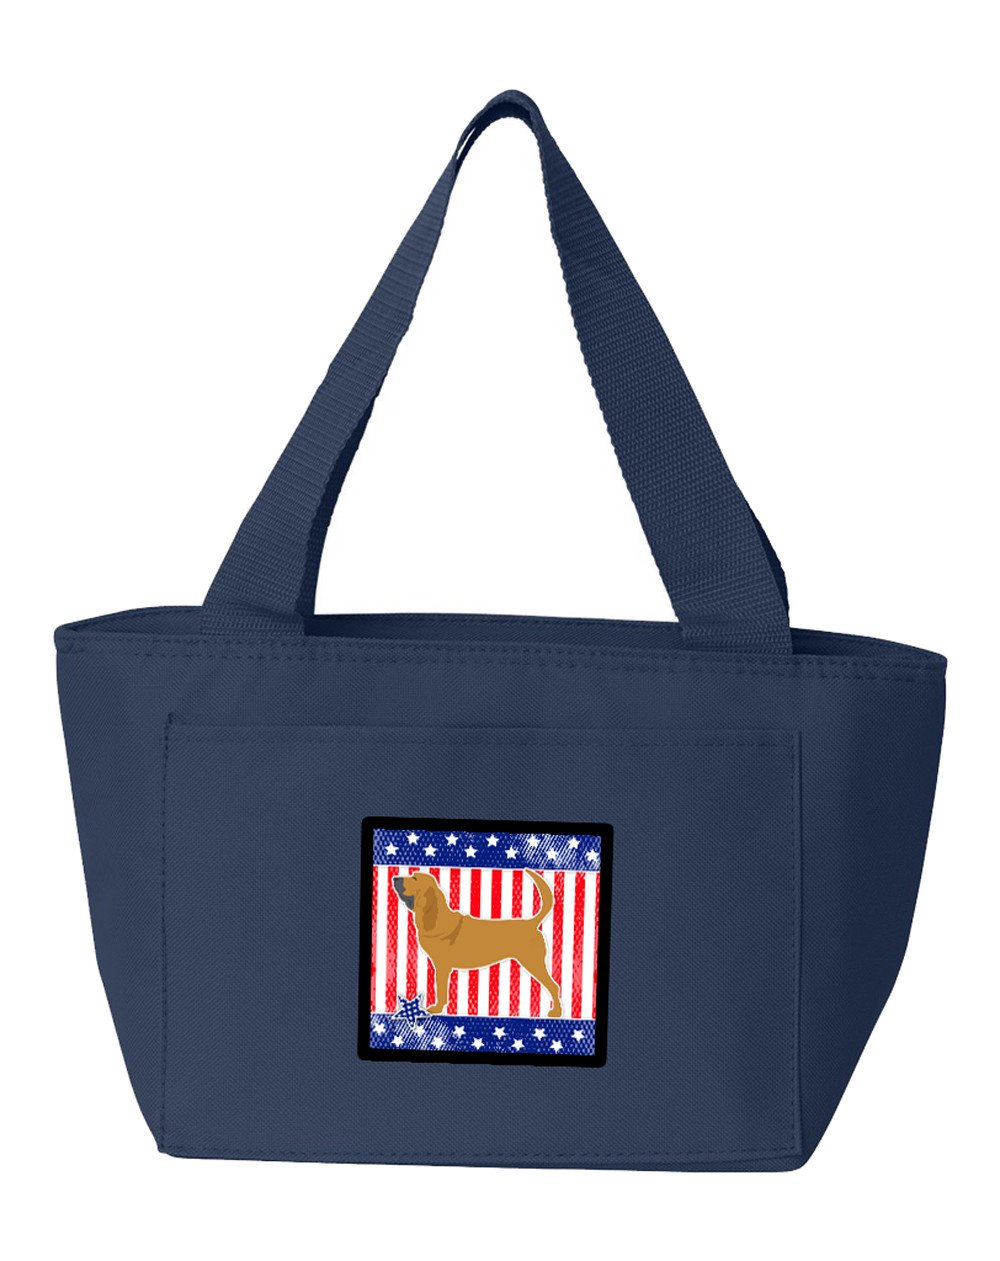 USA Patriotic Bloodhound Lunch Bag BB3284NA-8808 by Caroline's Treasures